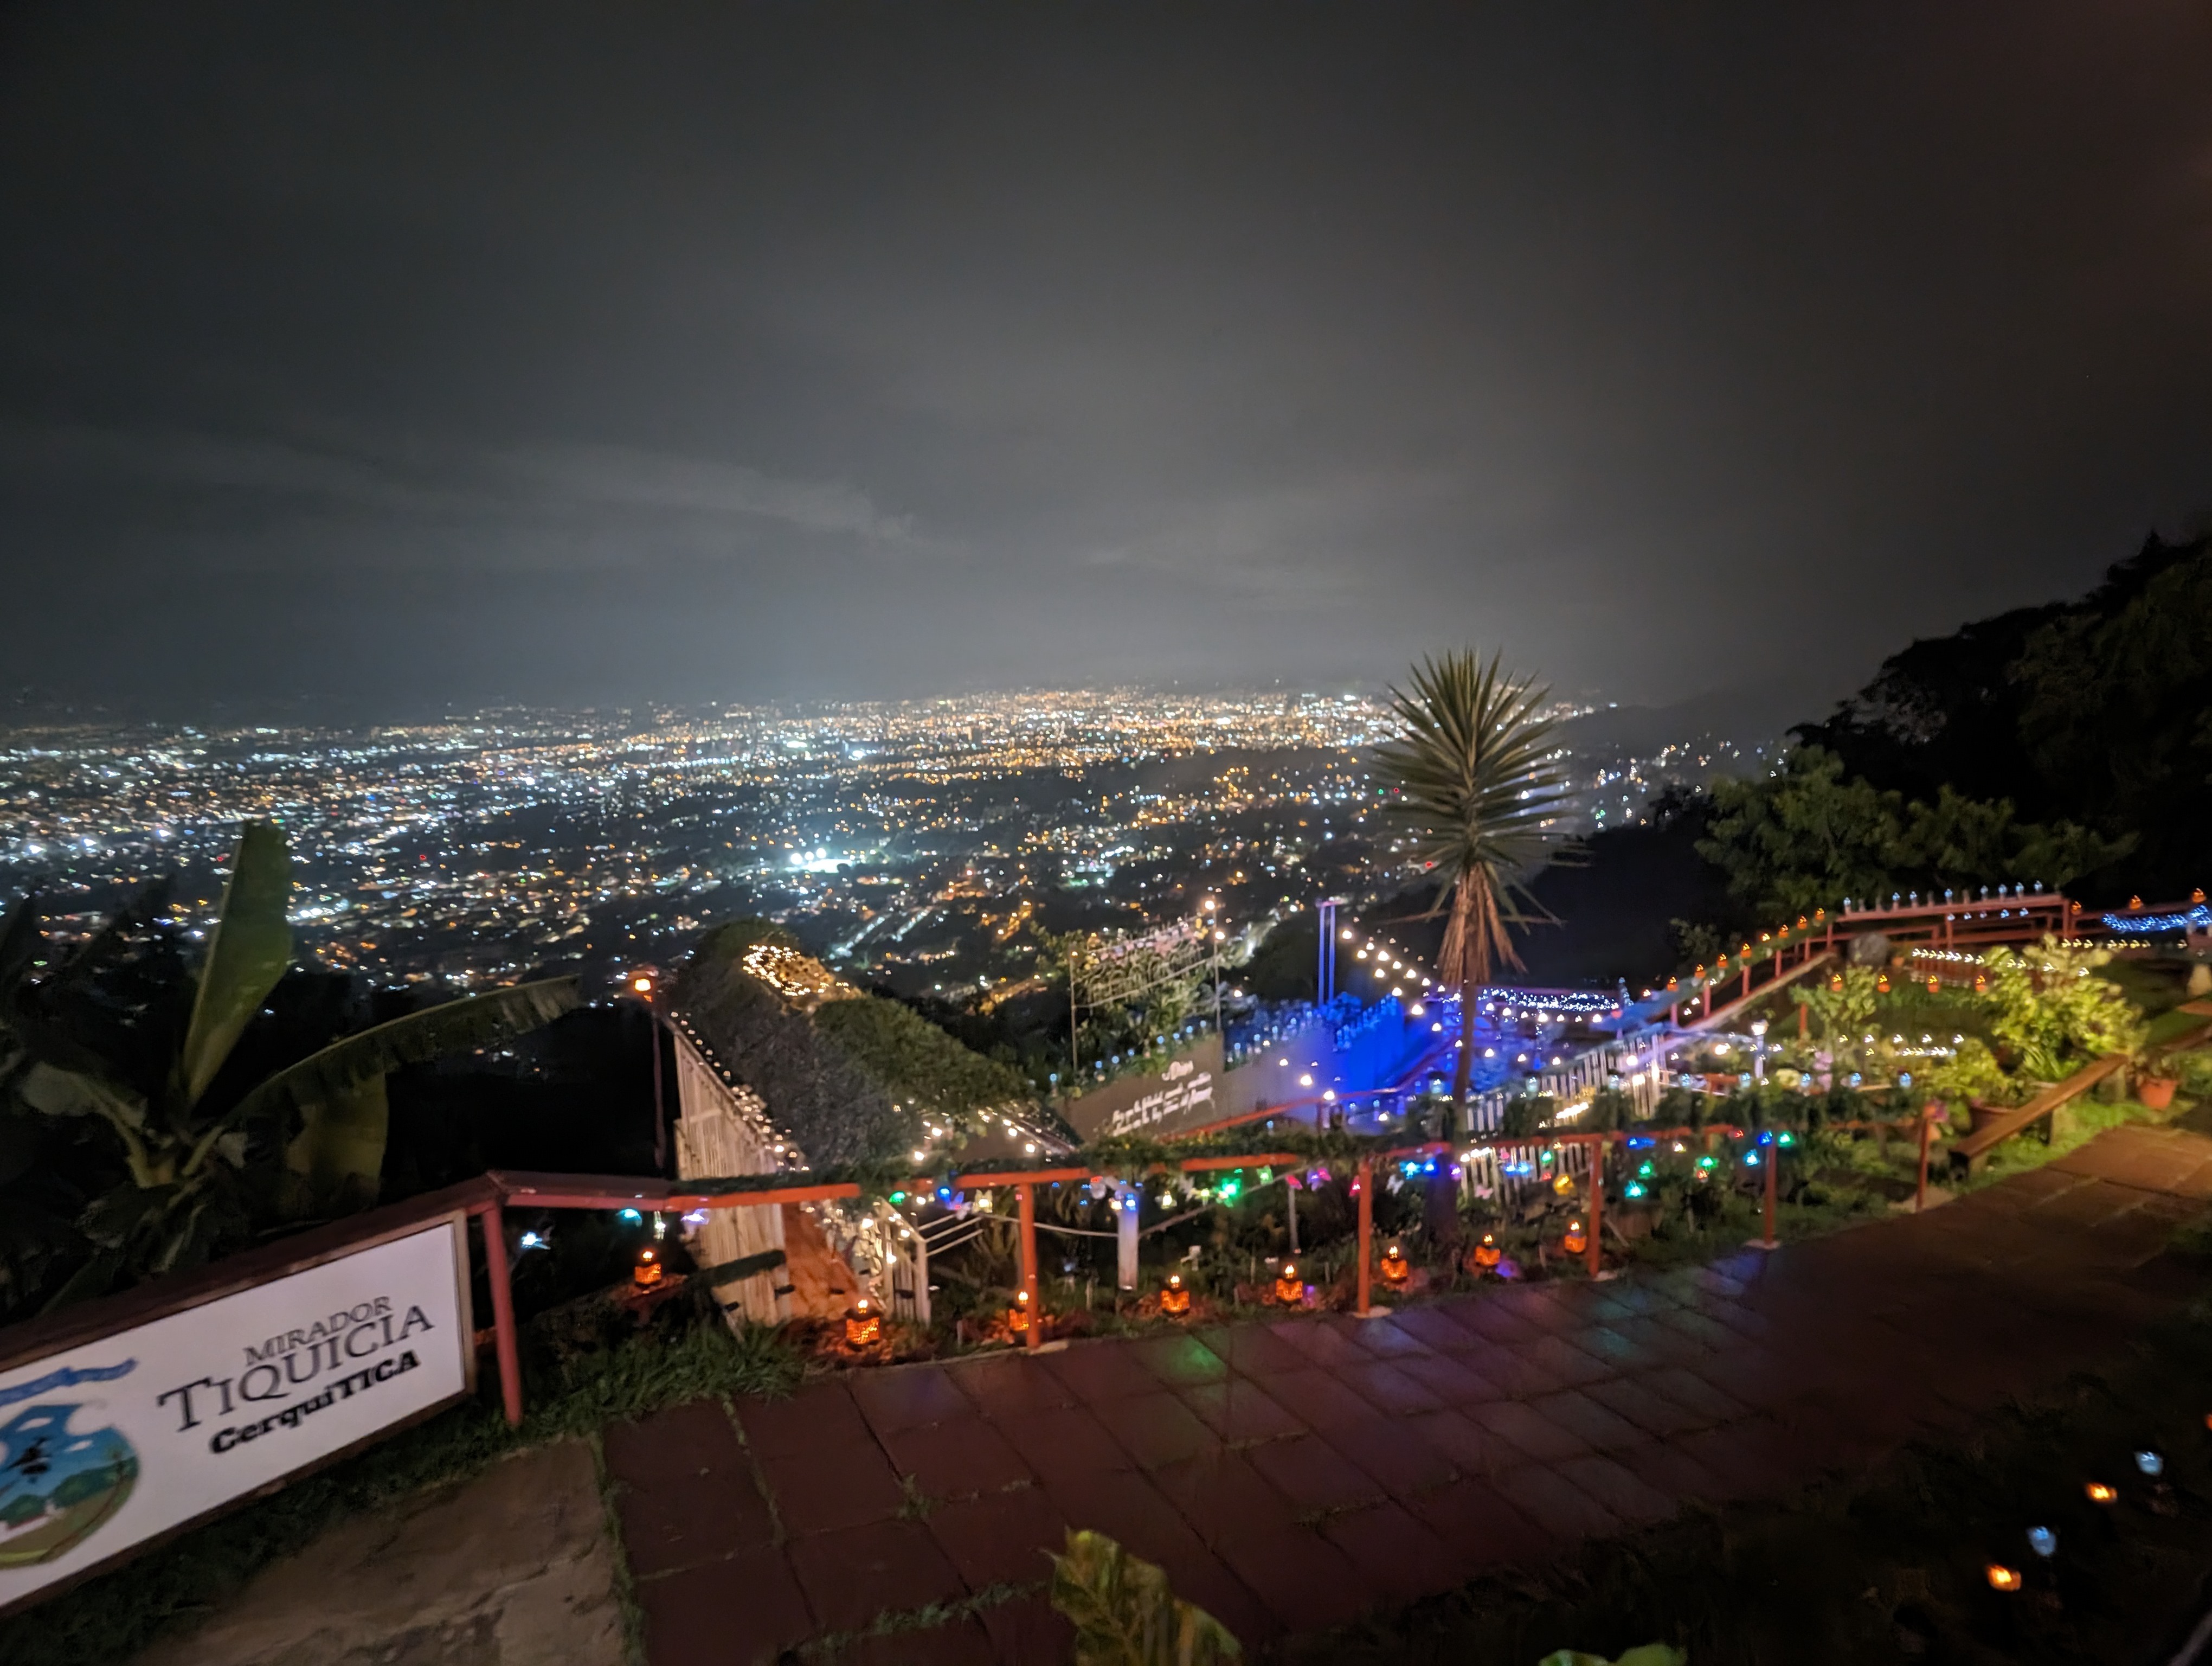 Night view of lights from hilltop